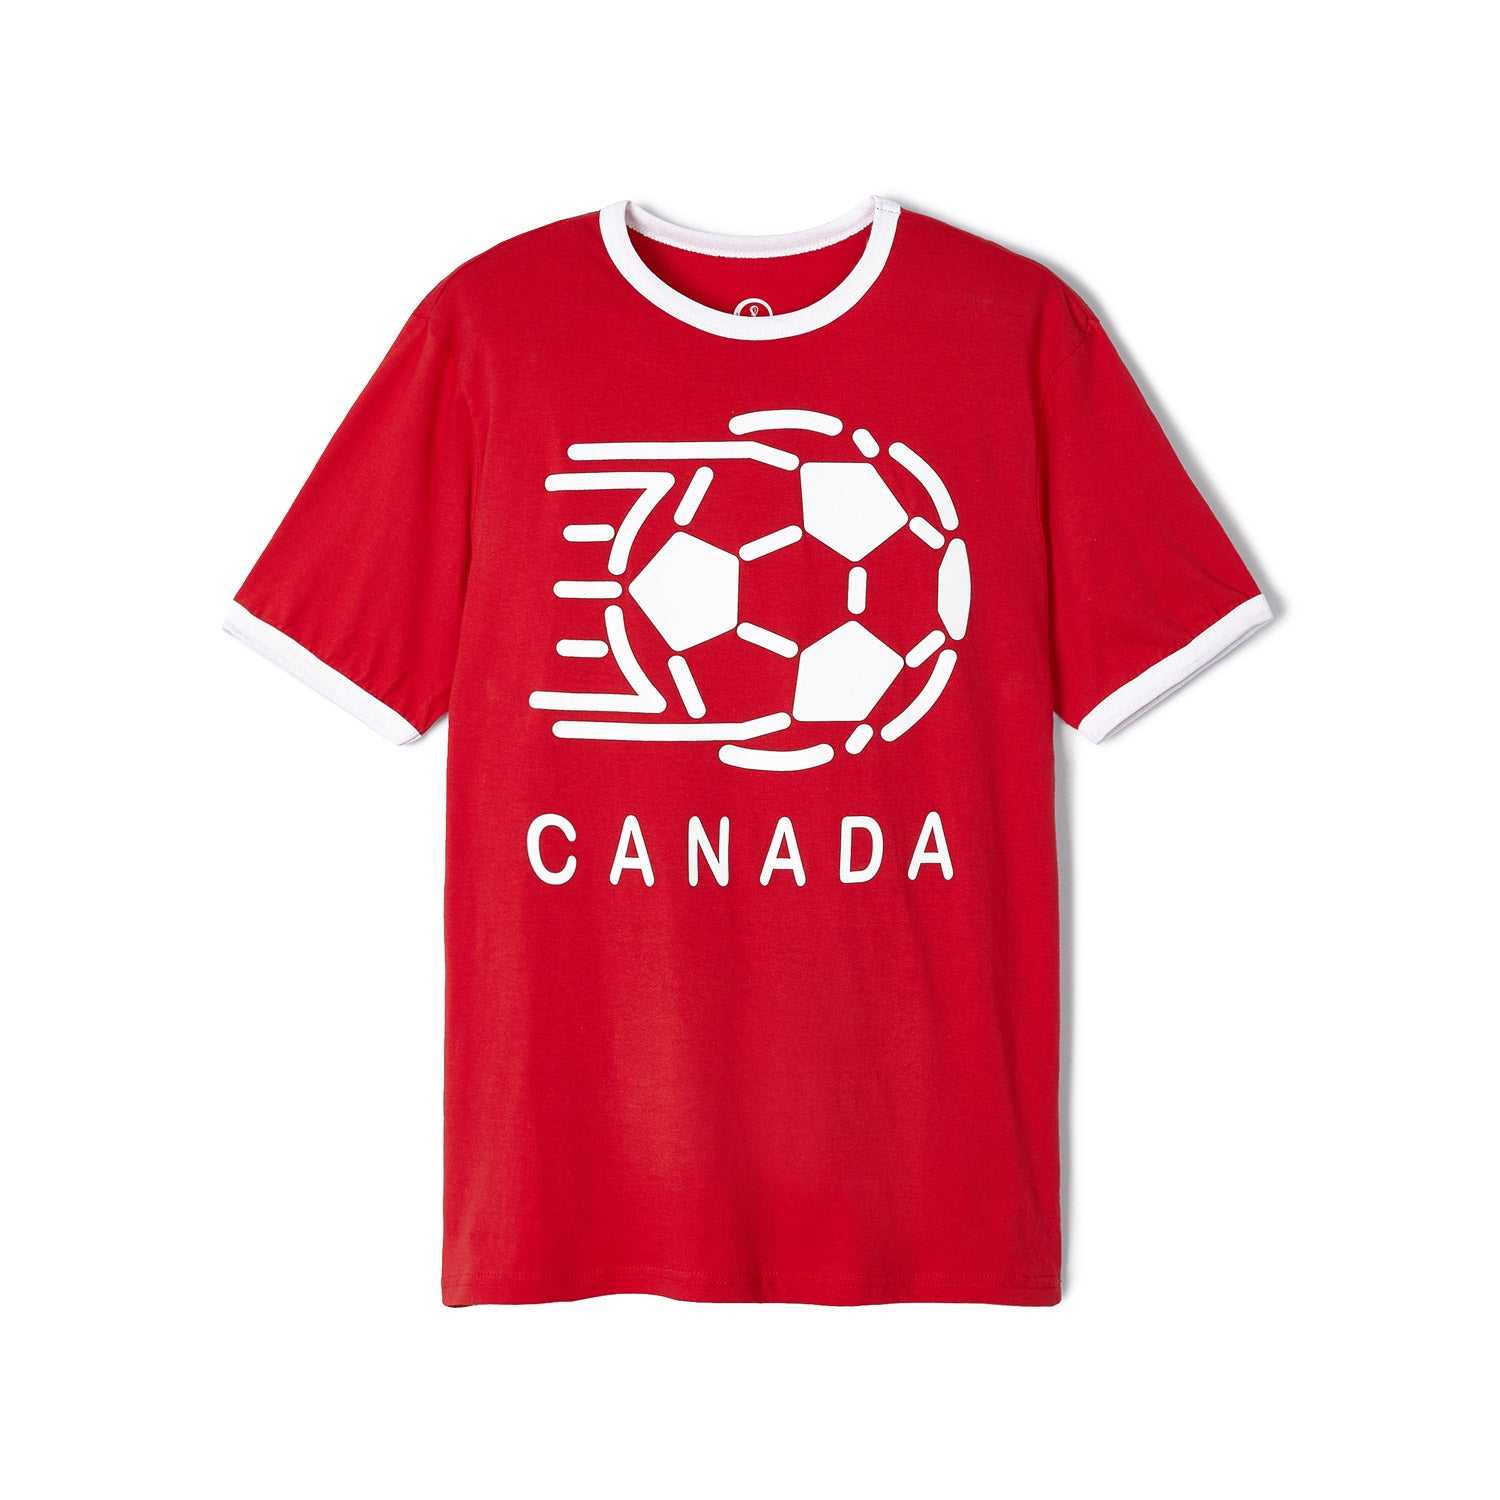 2022 World Cup Canada Ringer Red T-Shirt - Mens